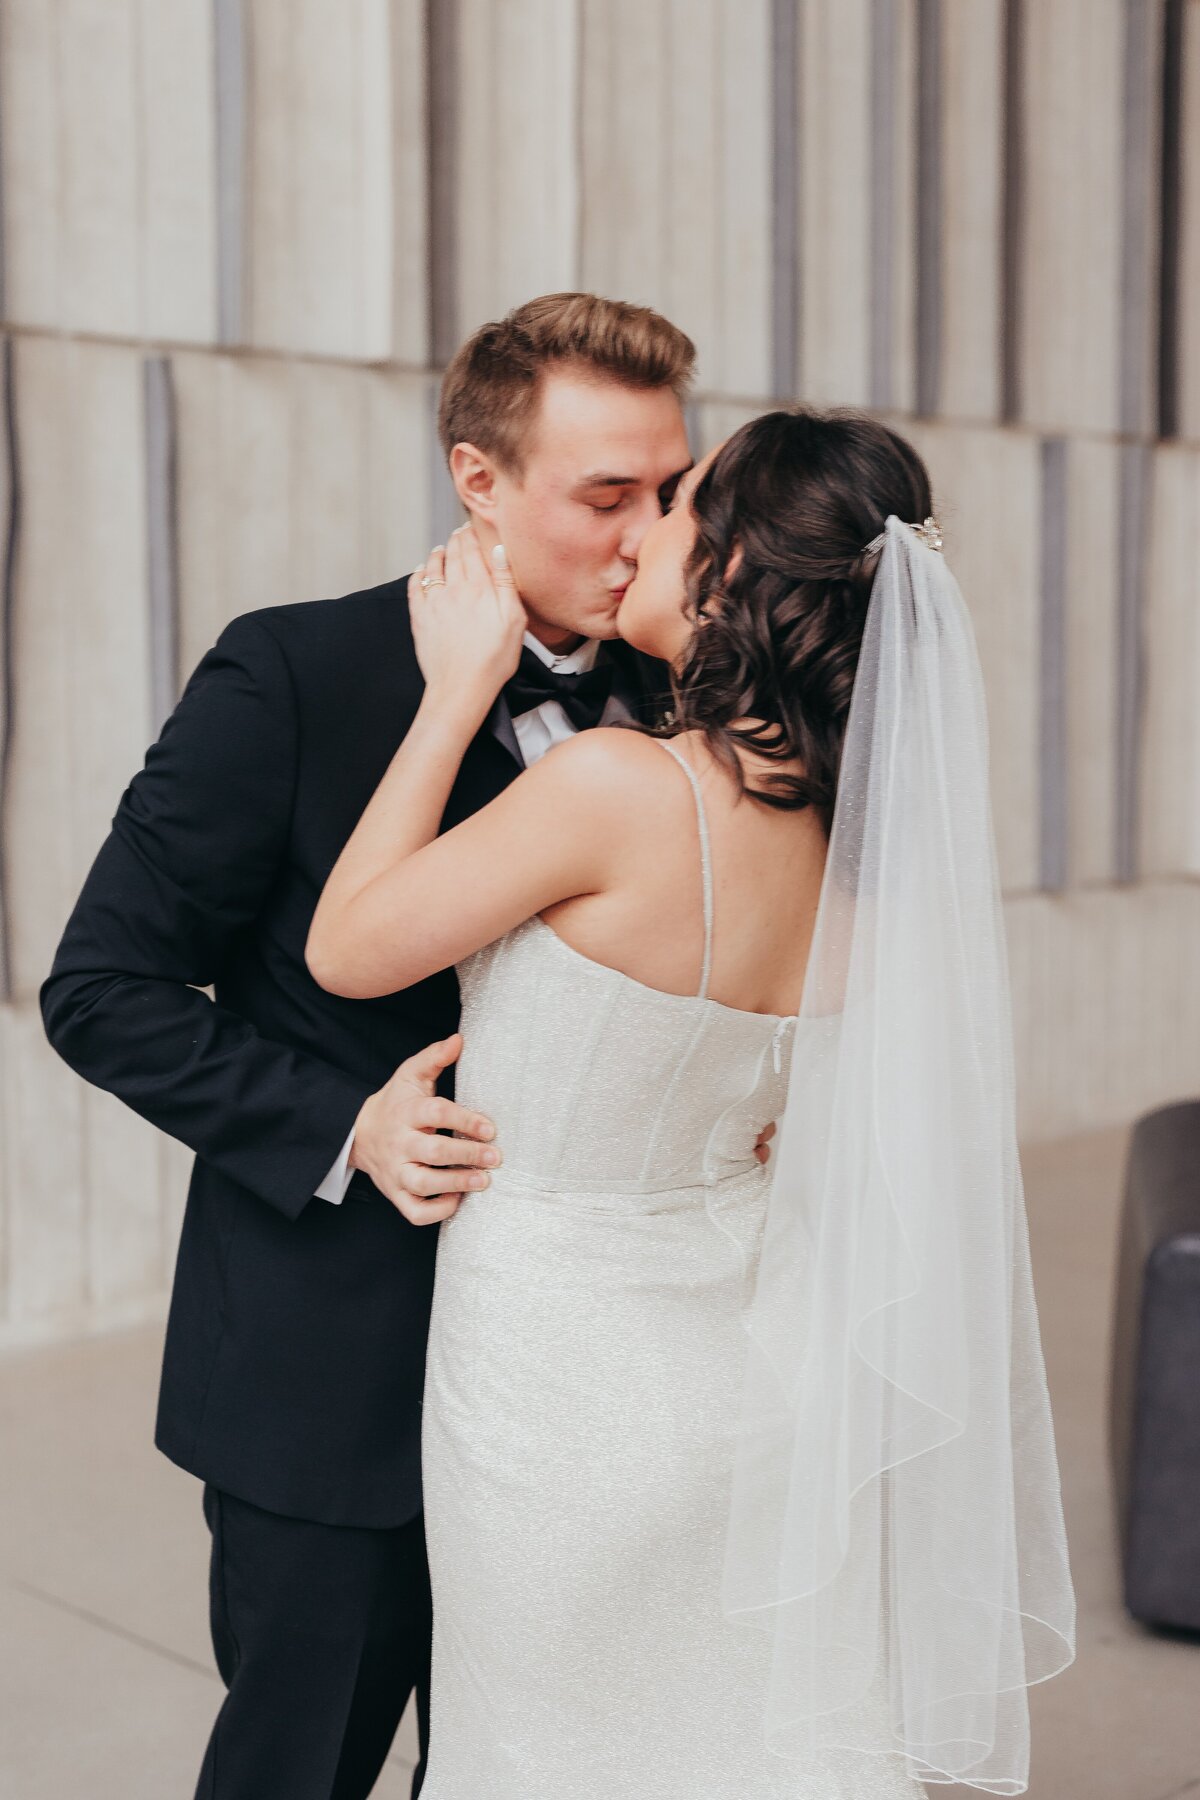 A bride and groom kissing at an Iowa wedding, both dressed in bridal attire, with the bride in a white dress and the groom in a black suit.